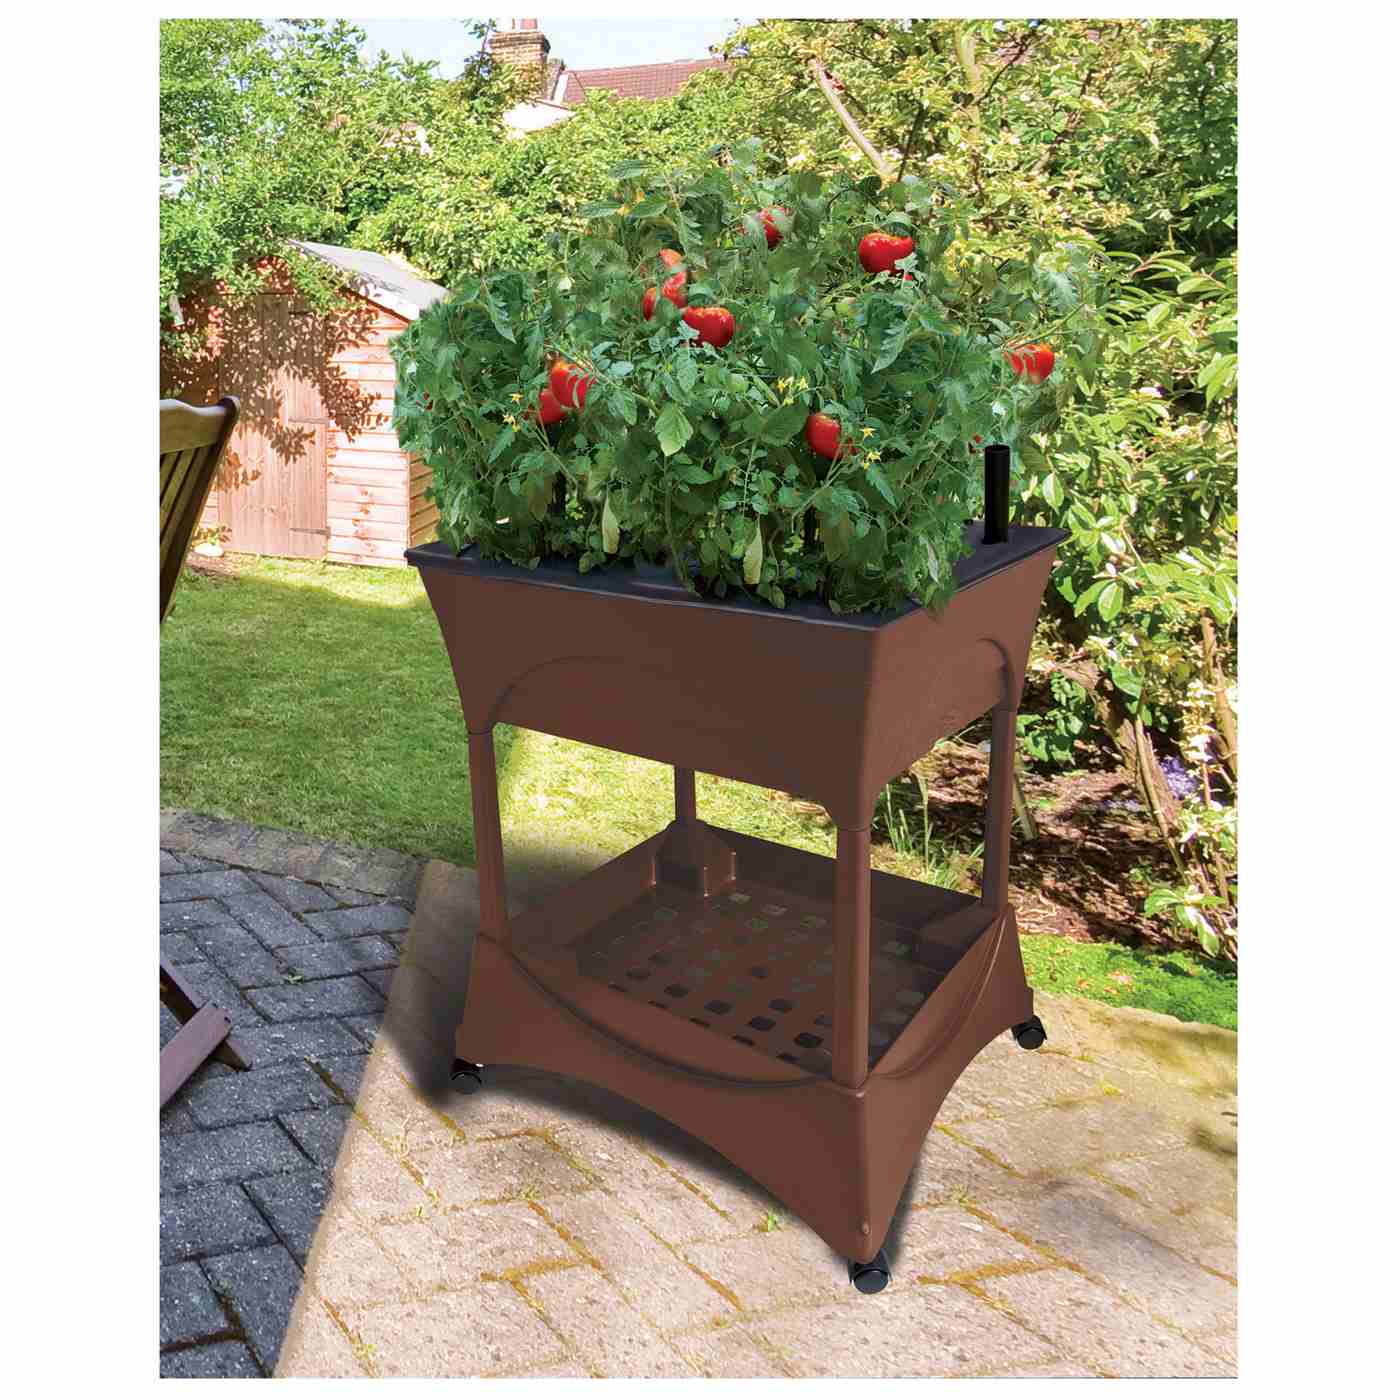 Easy Pickers Brown Raised Grow Box with Stand; image 4 of 6